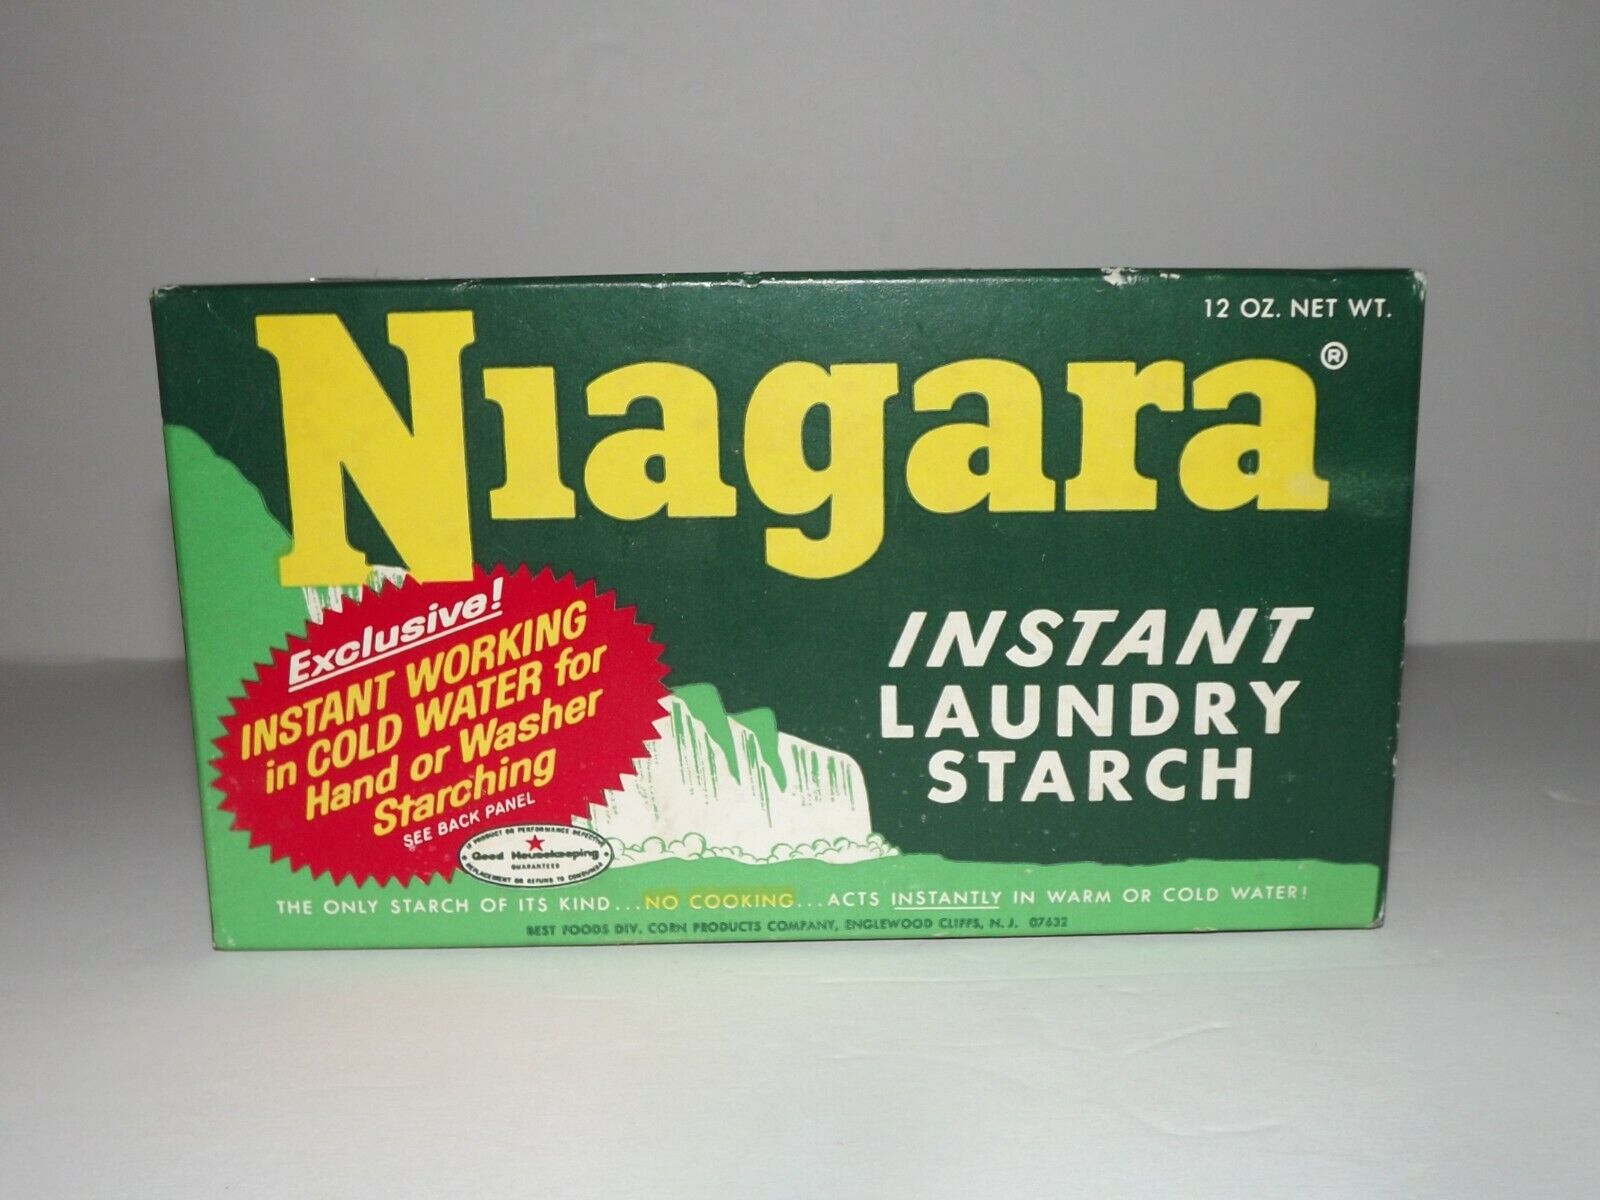 Vintage 1950's Niagara Instant Laundry Starch Box With Original Contents